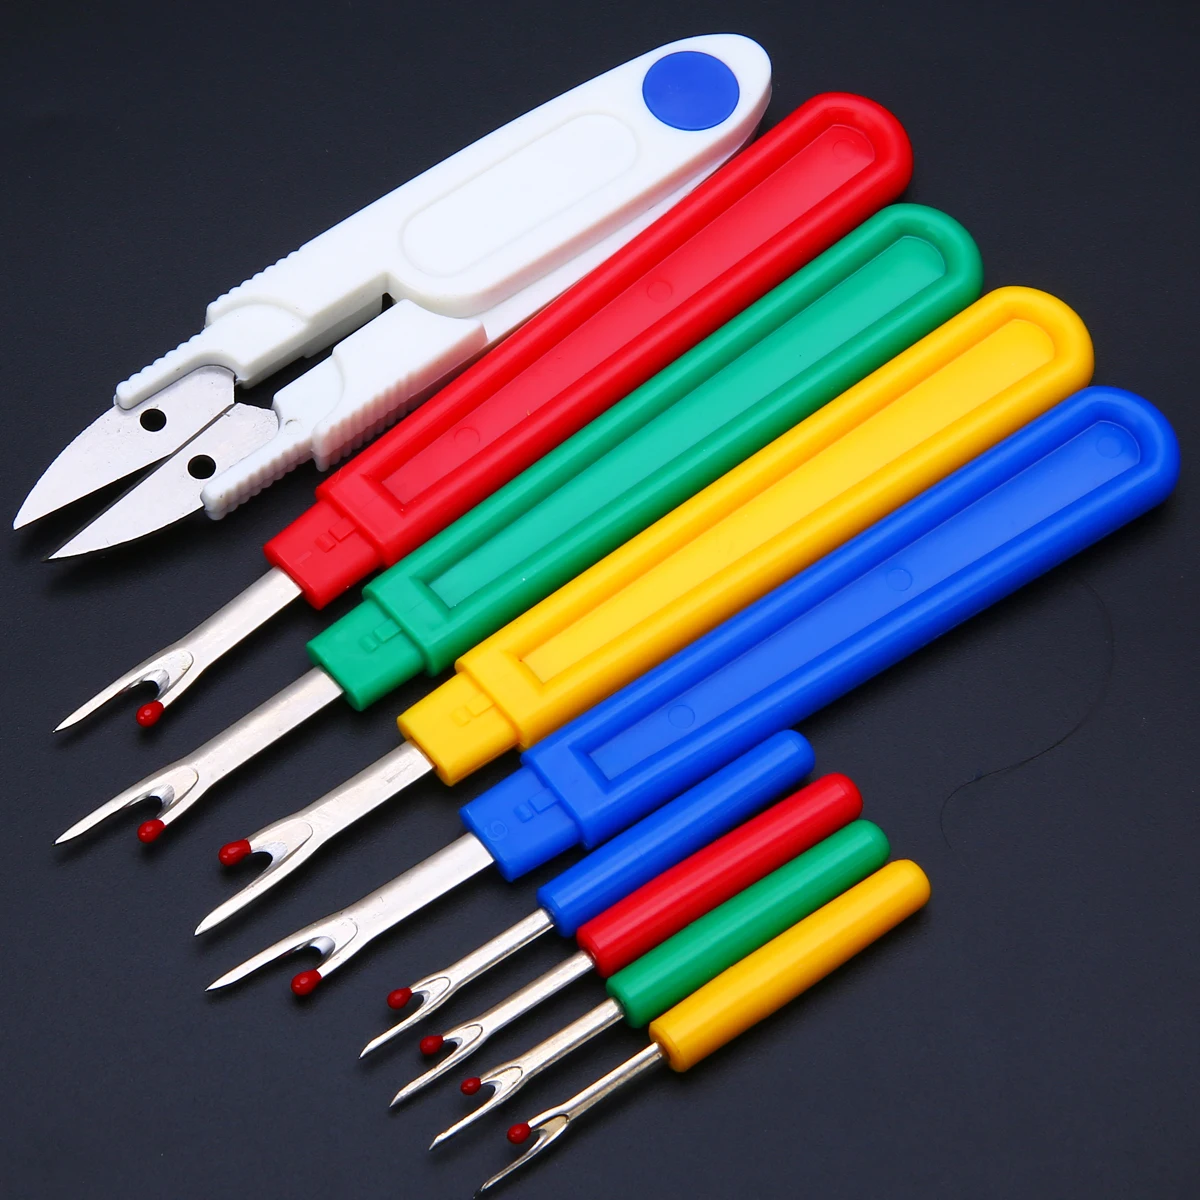 

9Pcs Large Small Seam Ripper Stitch Unpicker Craft Thread Cutter Sewing Tool With Plastic Handle Sewing Remover Tools Set